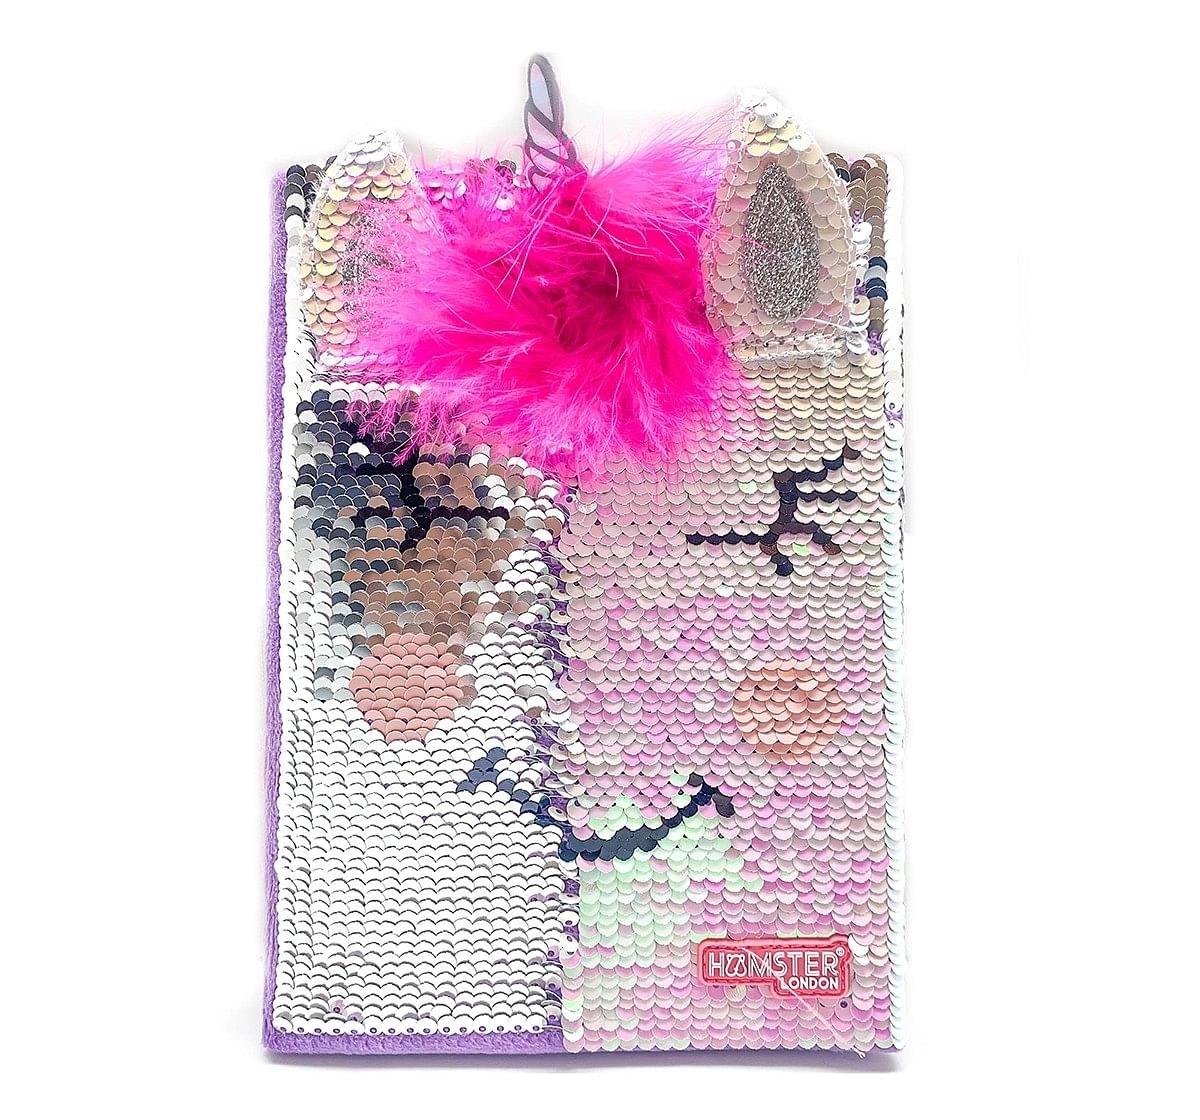 Hamster London Sequin Unicorn Diary for Kids age 3Y+ (Pink)